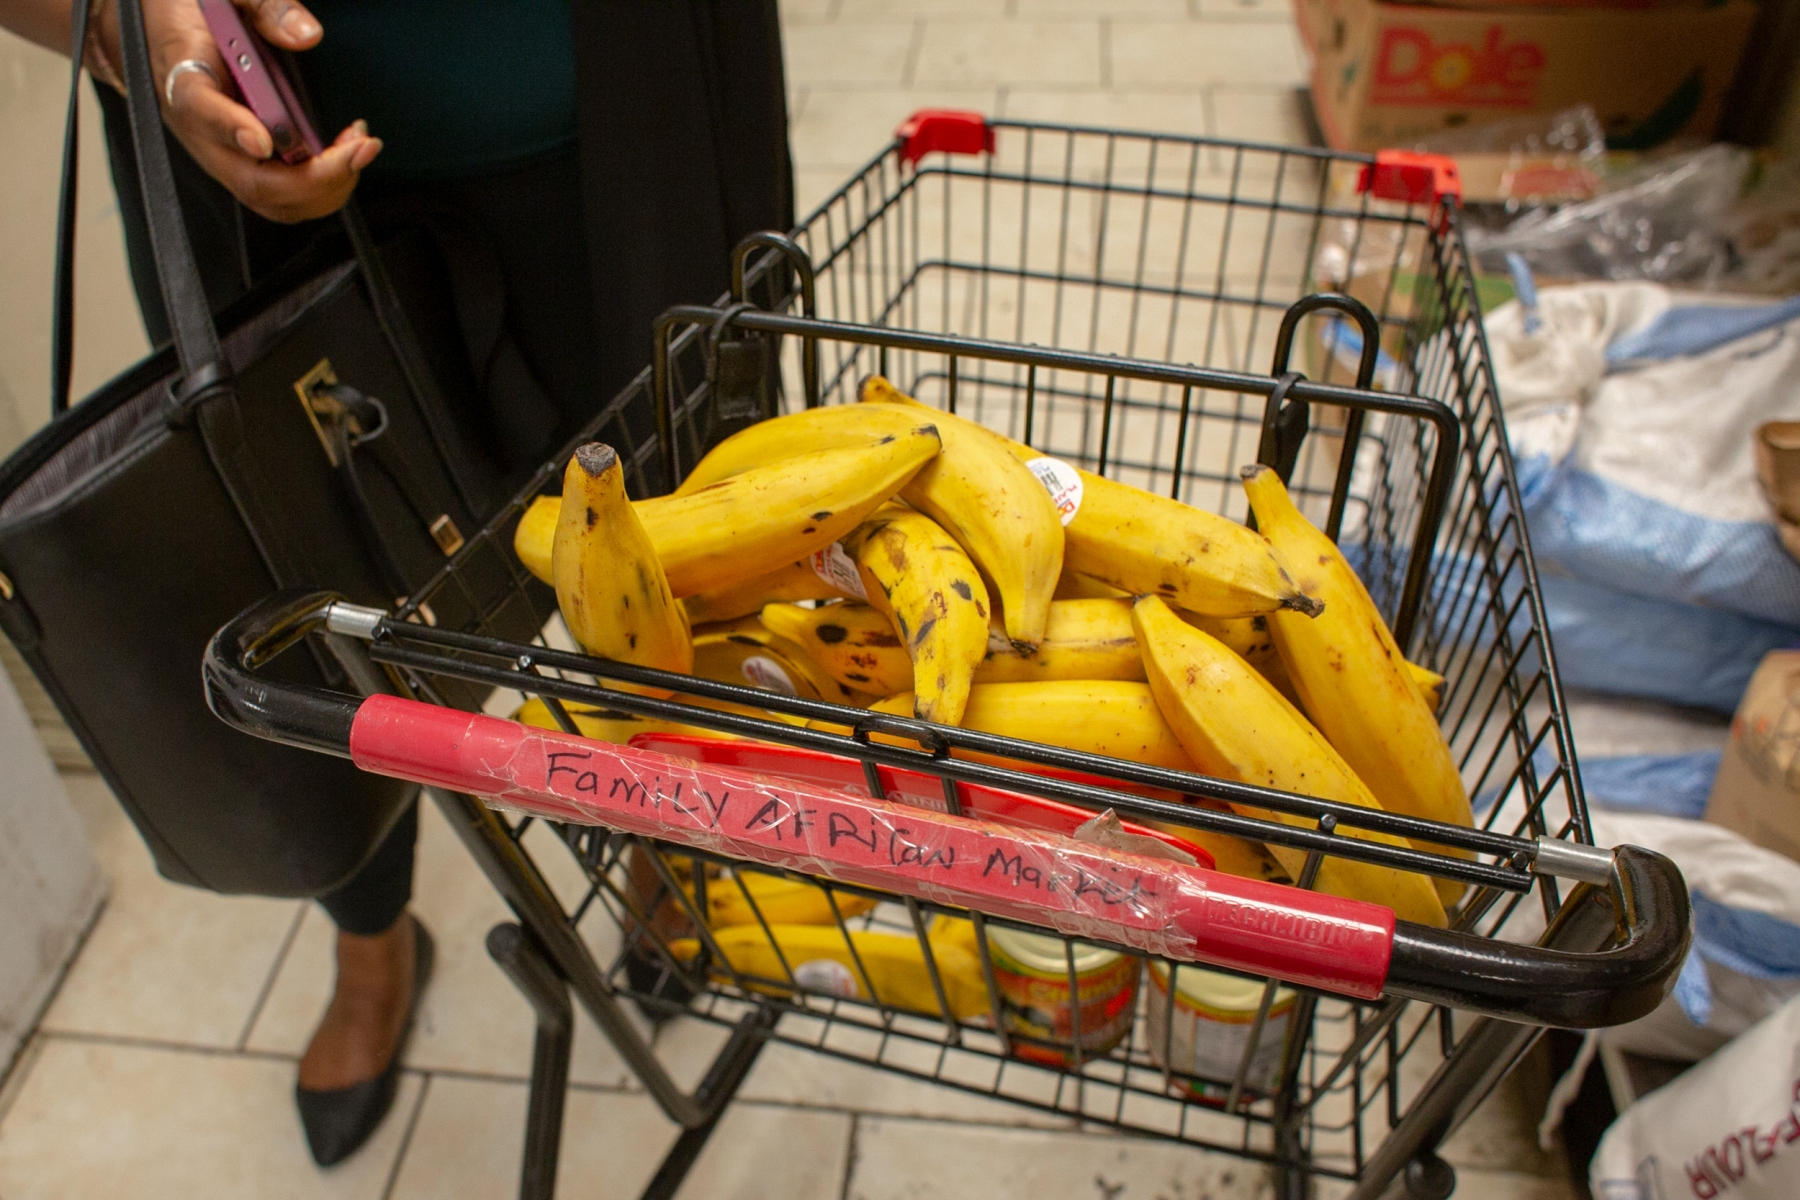 Kate and Pamela stock up on ripe plantains during their weekly shop at the Family African Market. "I'm here to buy stuff that I can't find in the big stores, like Walmart or Meijer. I'm used to buying my food [at Family African Market] because it reminds me of where I come from," Kate says before shopping.